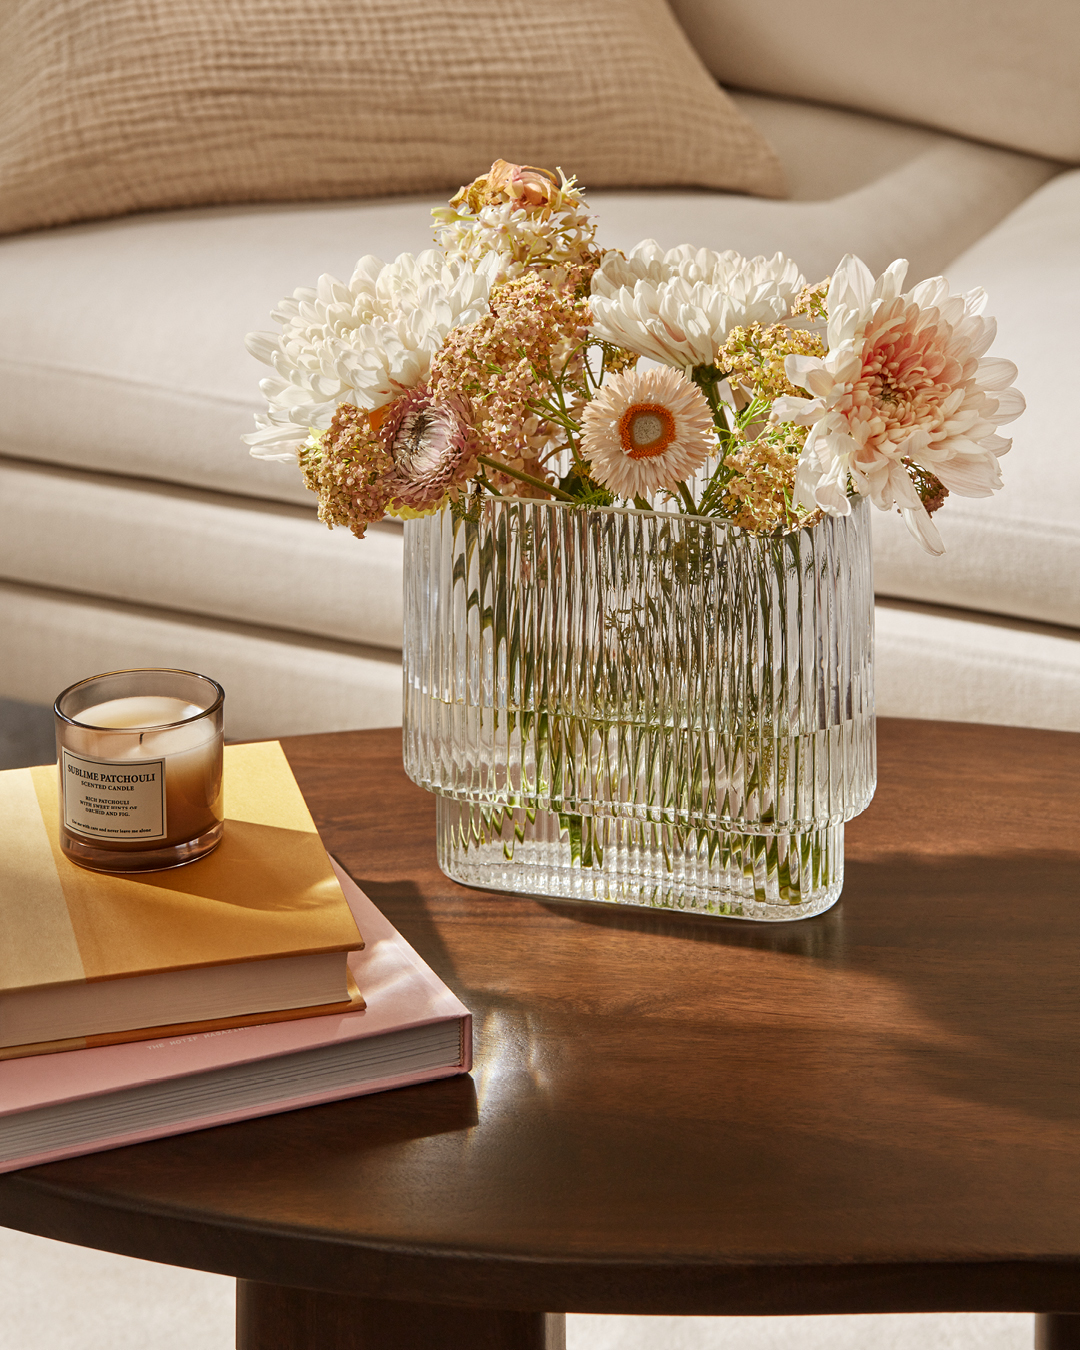 A ribbed glass vase sits on a coffee table. The vase is filled with lowers.